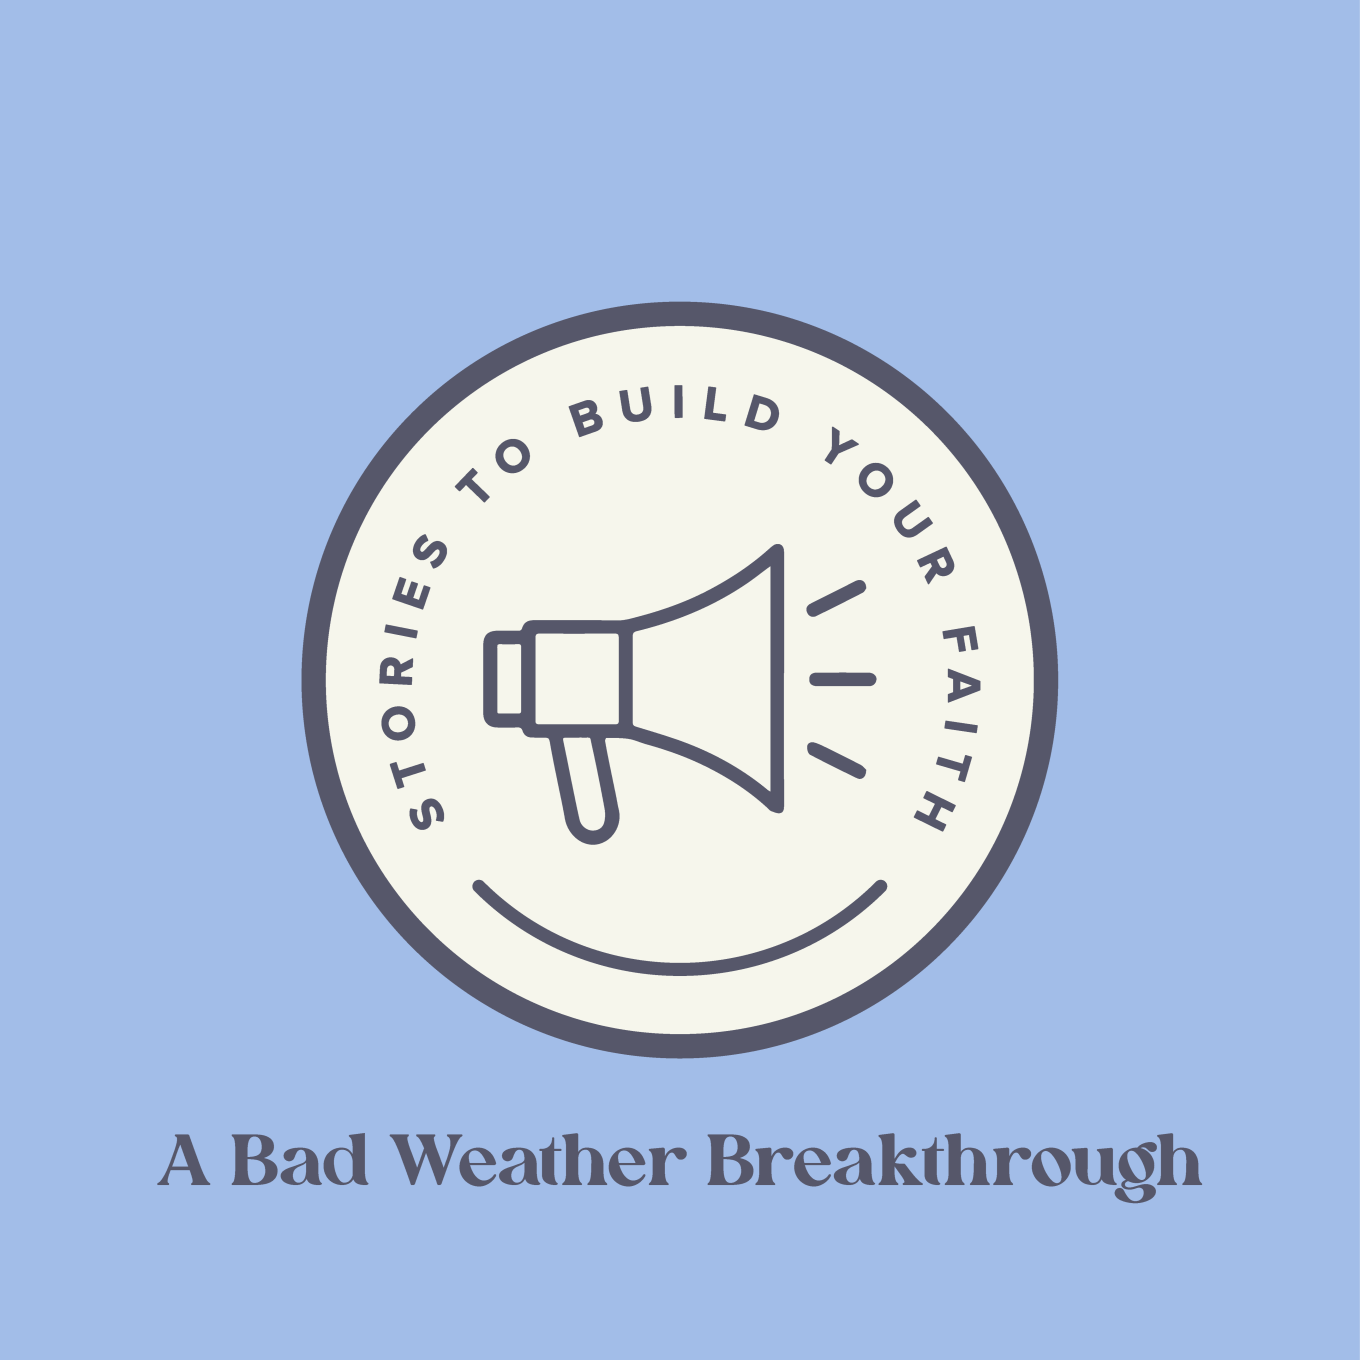 A Bad Weather Breakthrough